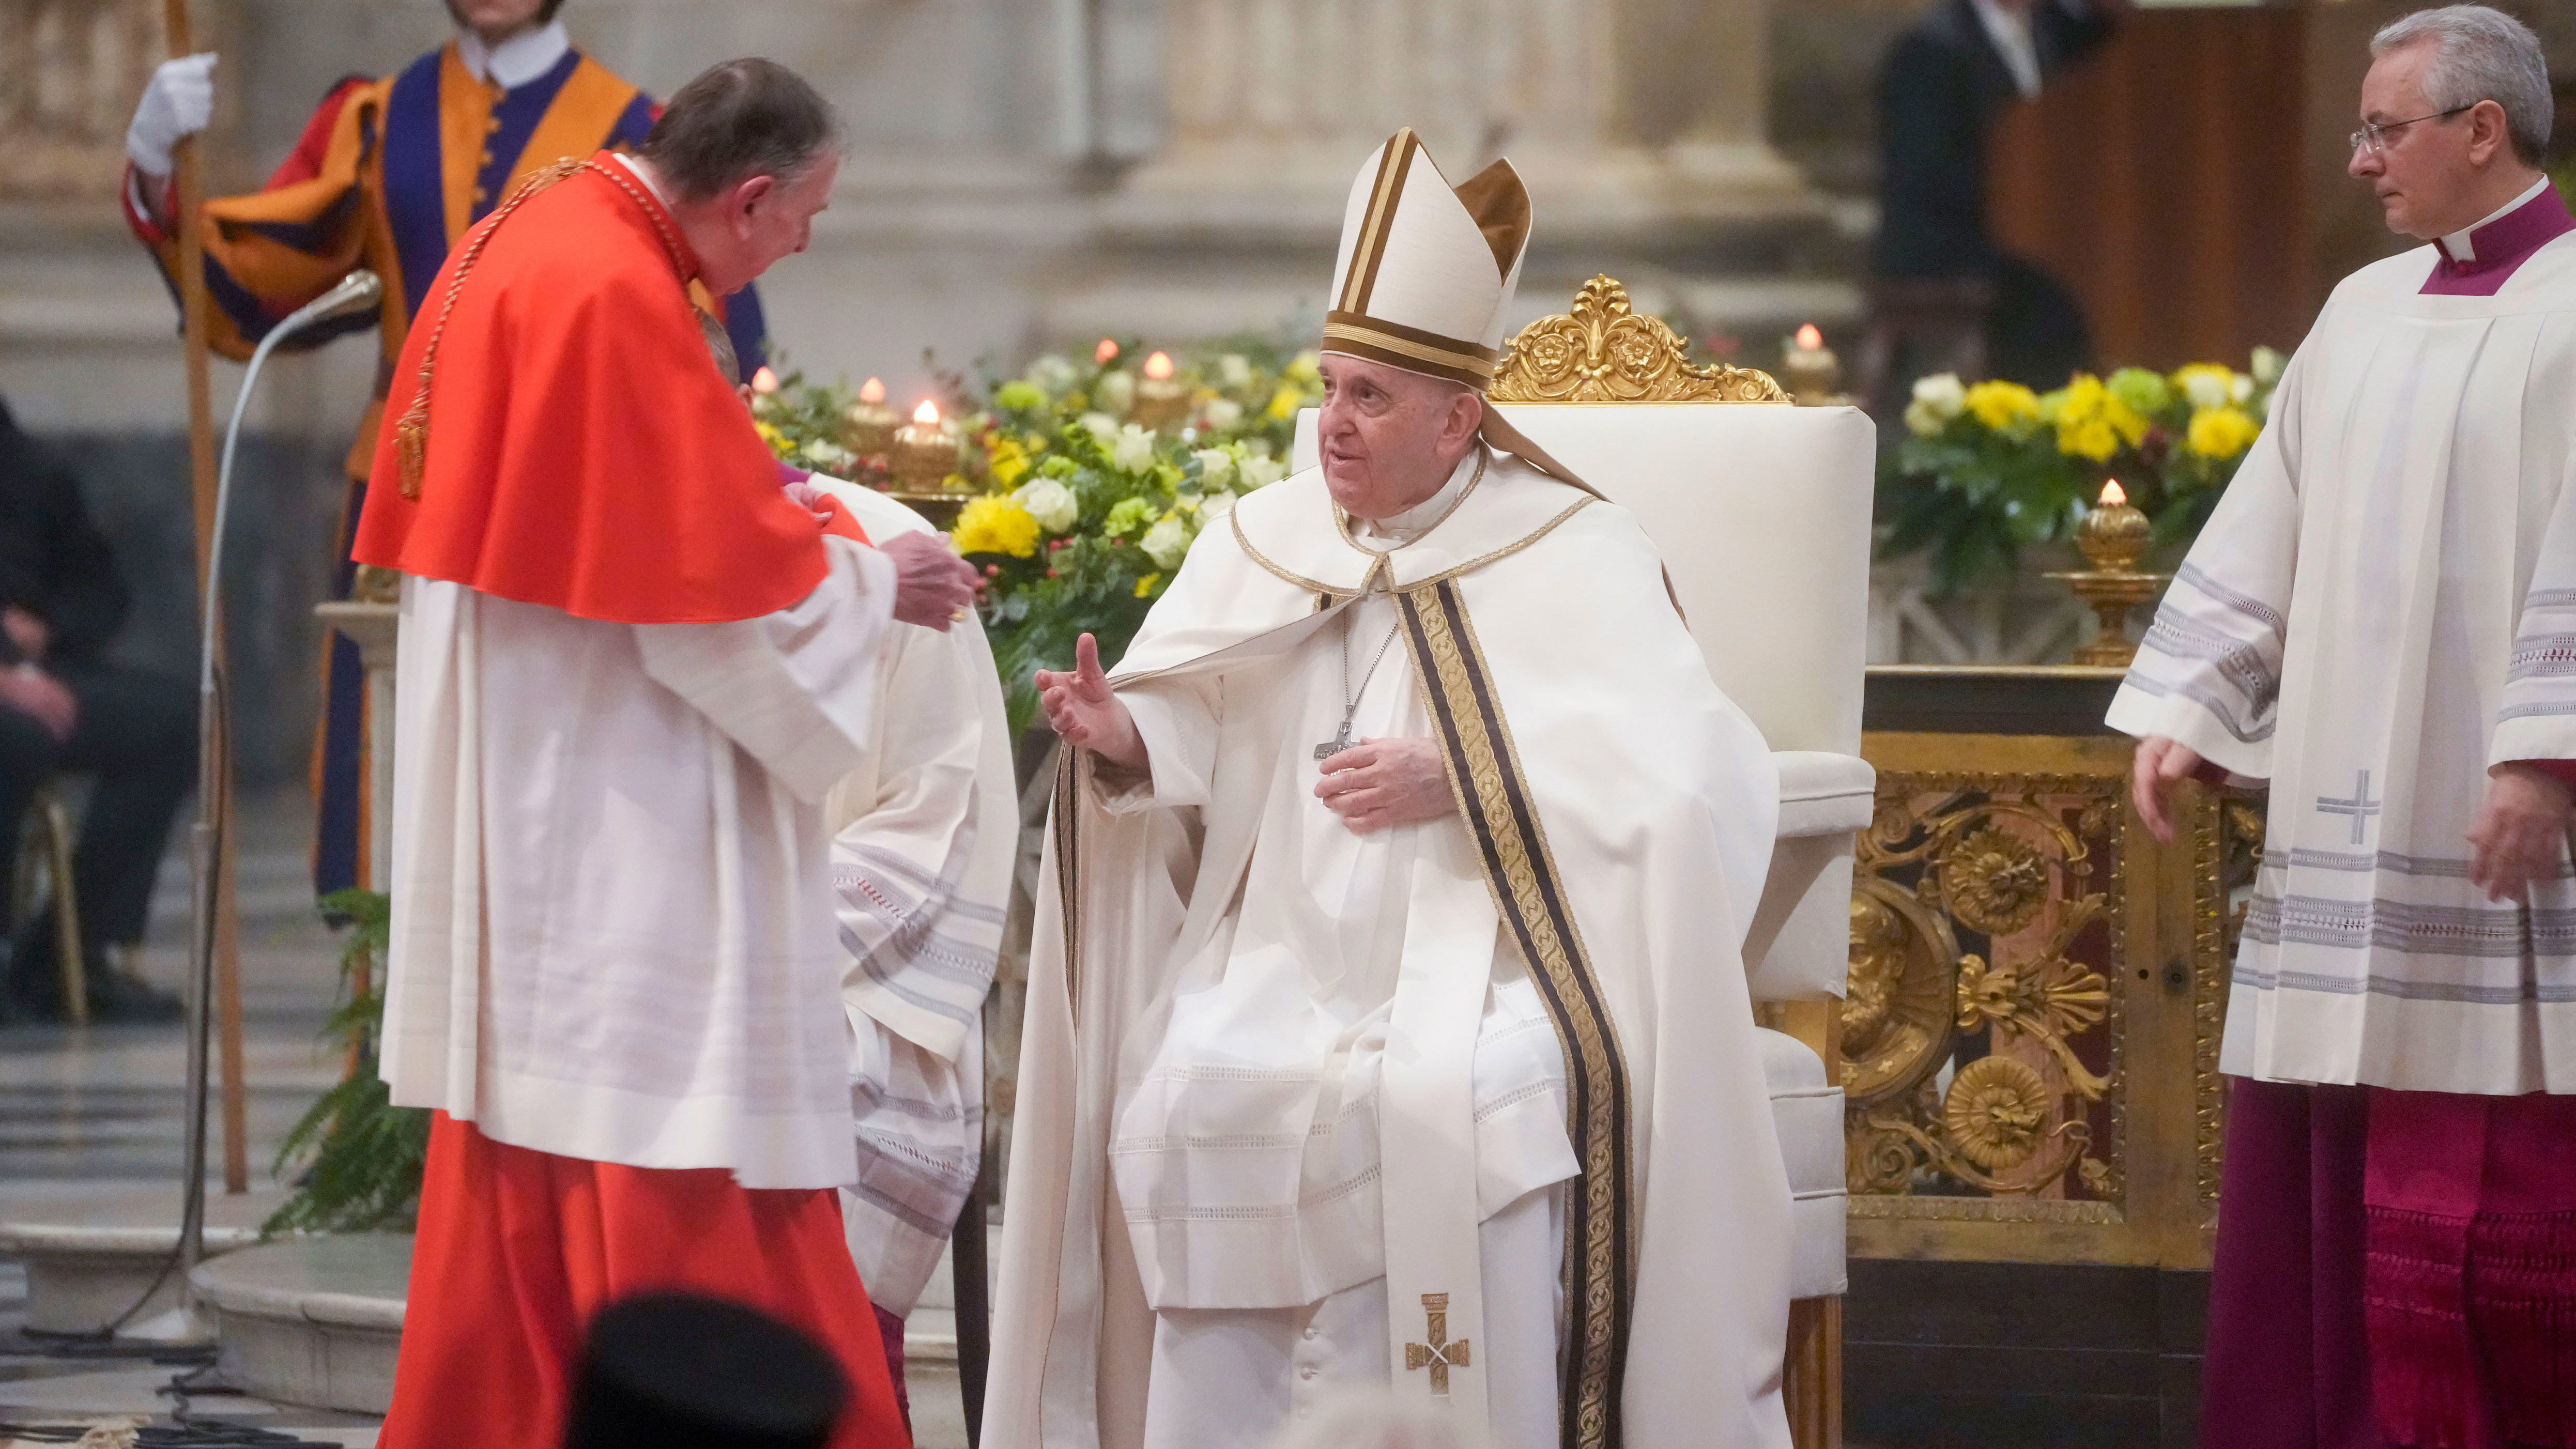 President of the Dicastery for Promoting Christian Unity, Swiss Cardinal Kurt Koch, left, greets Pope Francis at the end of the vespers the latter presided in the Roman Basilica of St. Paul Outside The Walls where the tomb of the Evangelist was built.